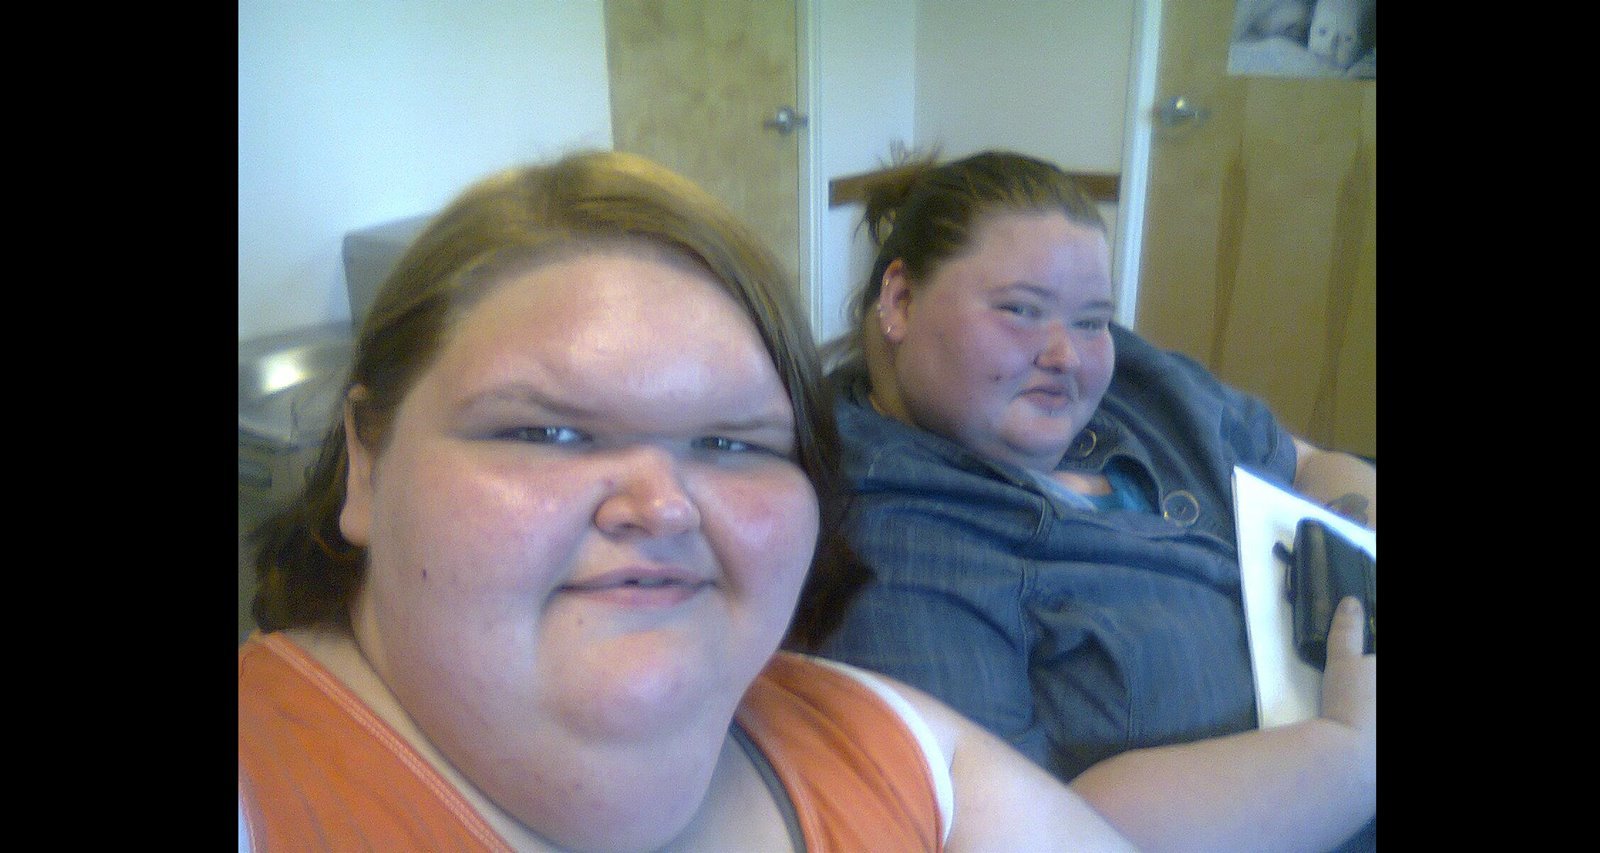 Amy and Tammy Slaton, Facts About the YouTube Siblings on TLC’s “1,000-Lb Sisters”